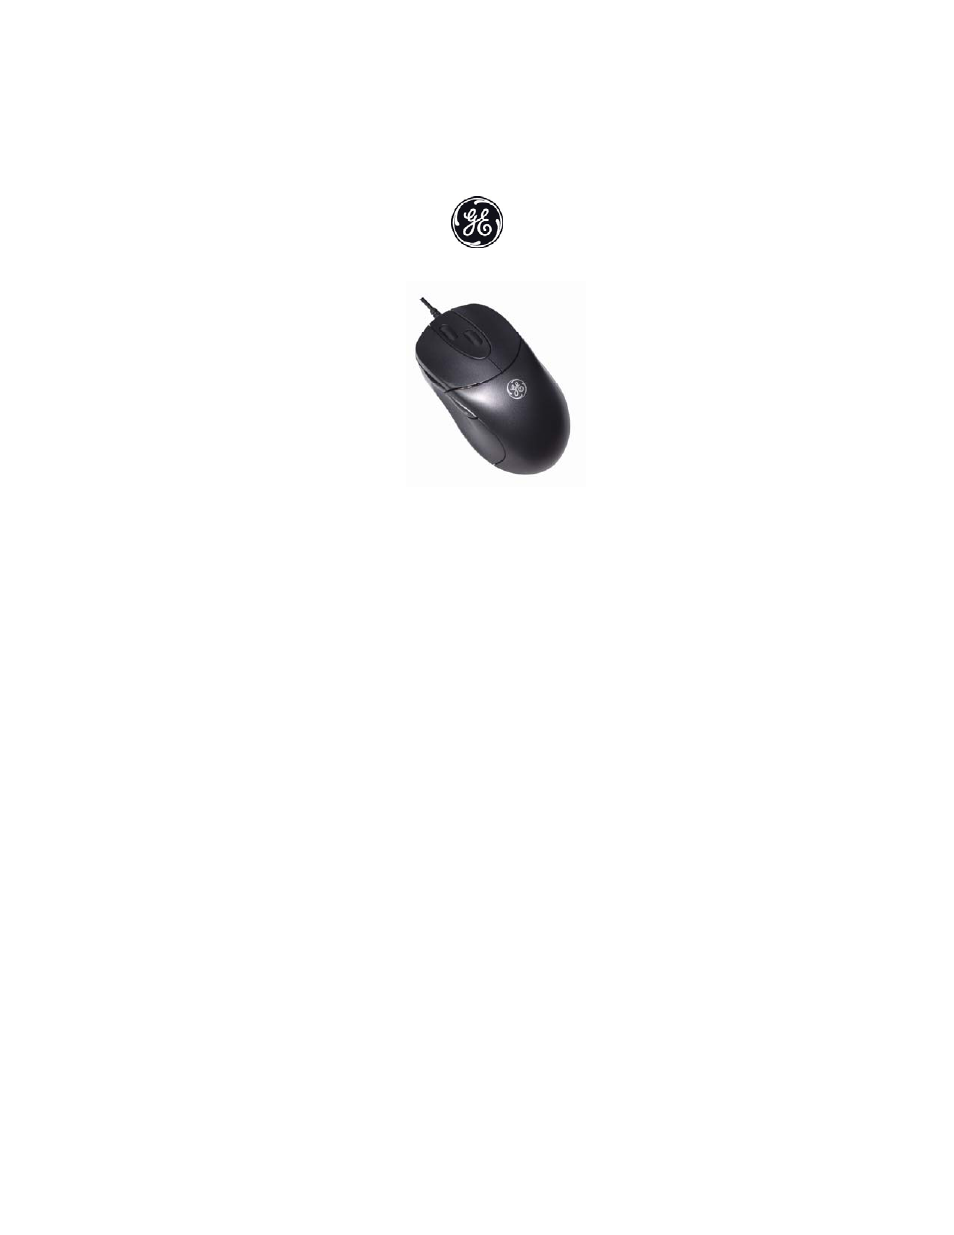 GE 97769 GE Wired Dual Scroll Optical Mouse for PCs User Manual | 9 pages